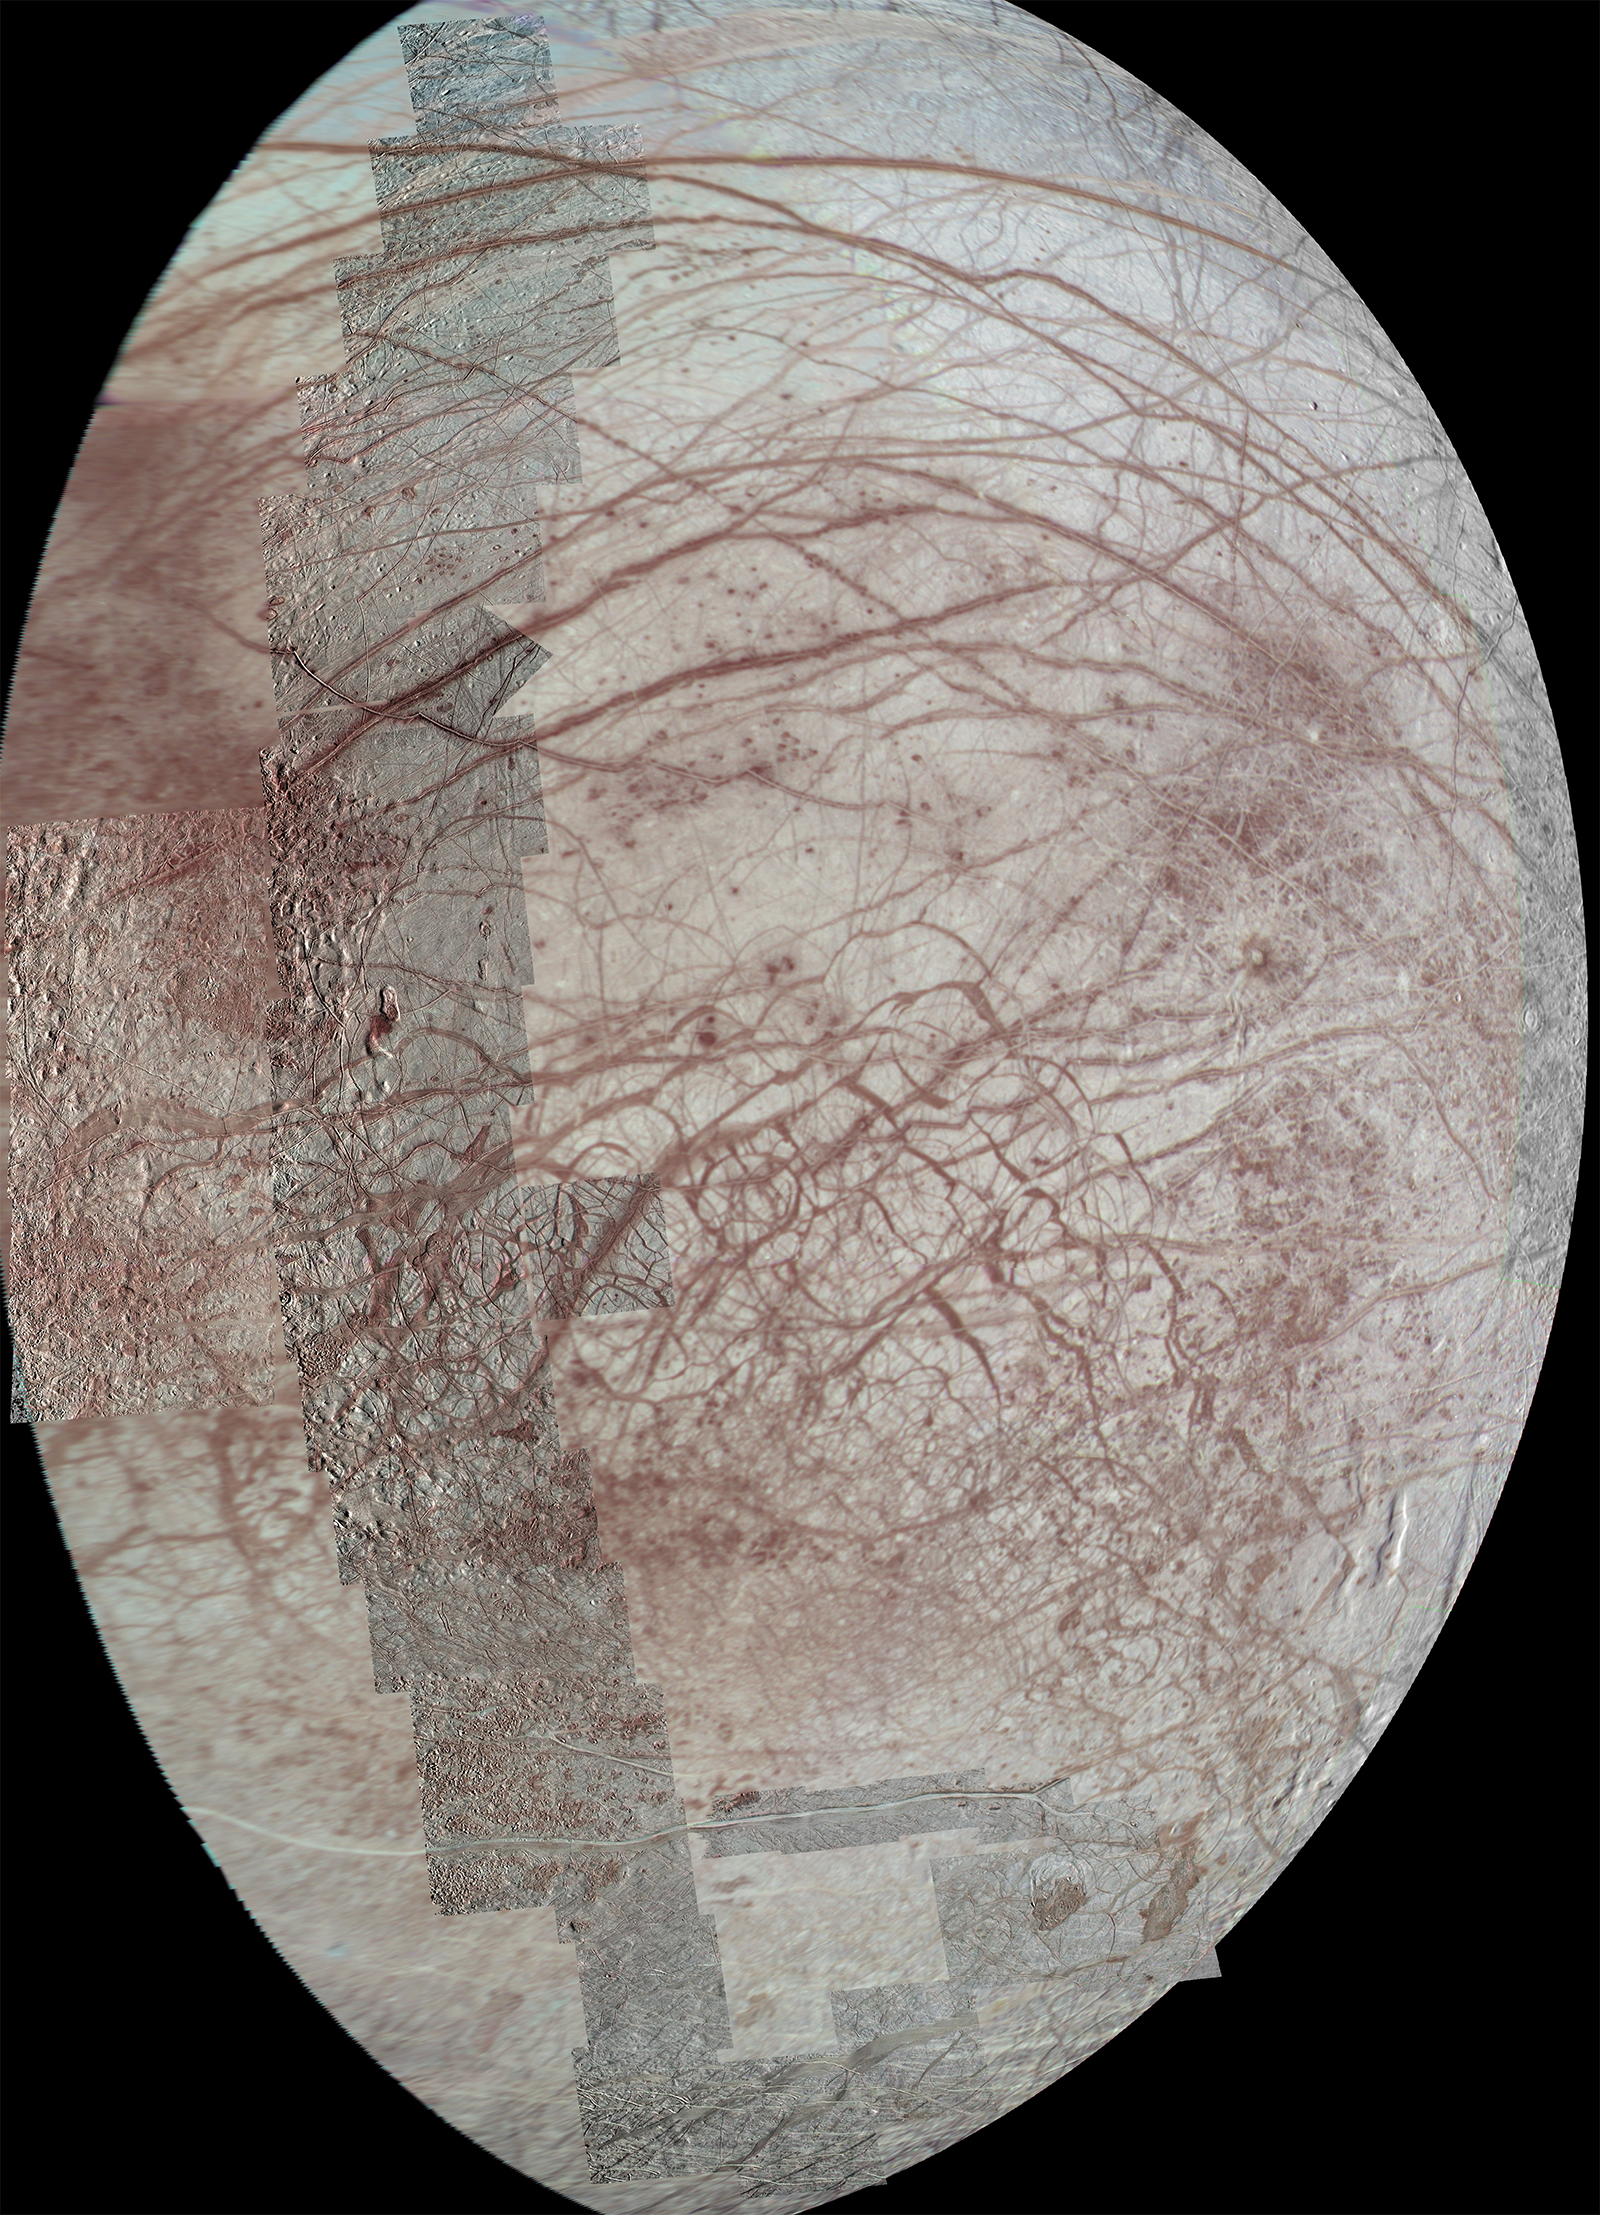 Image of Europa from pole-to-pole.